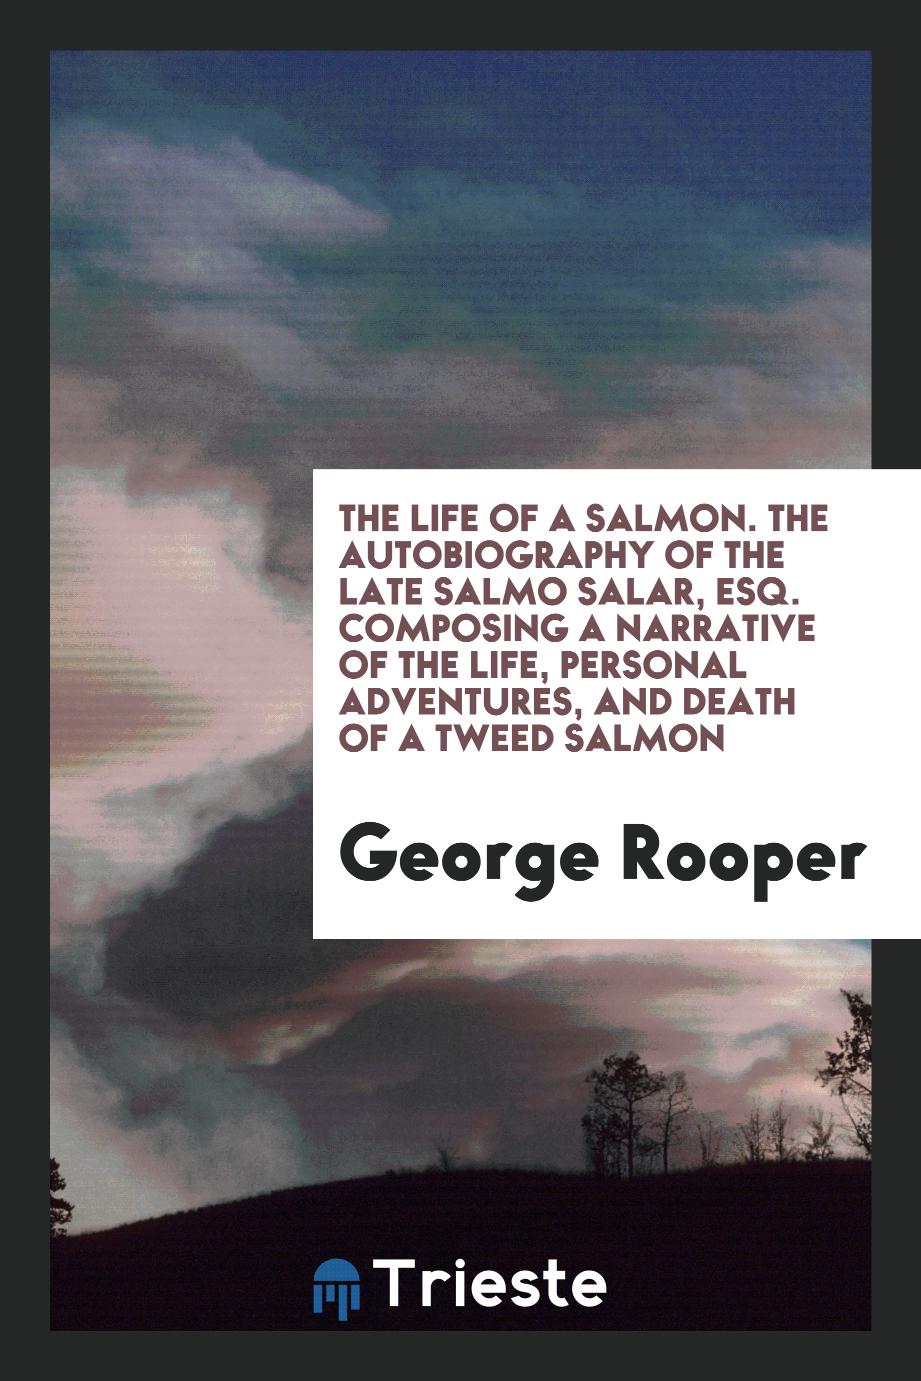 The life of a Salmon. The Autobiography of the Late Salmo Salar, Esq. Composing a narrative of the life, personal adventures, and death of a tweed Salmon